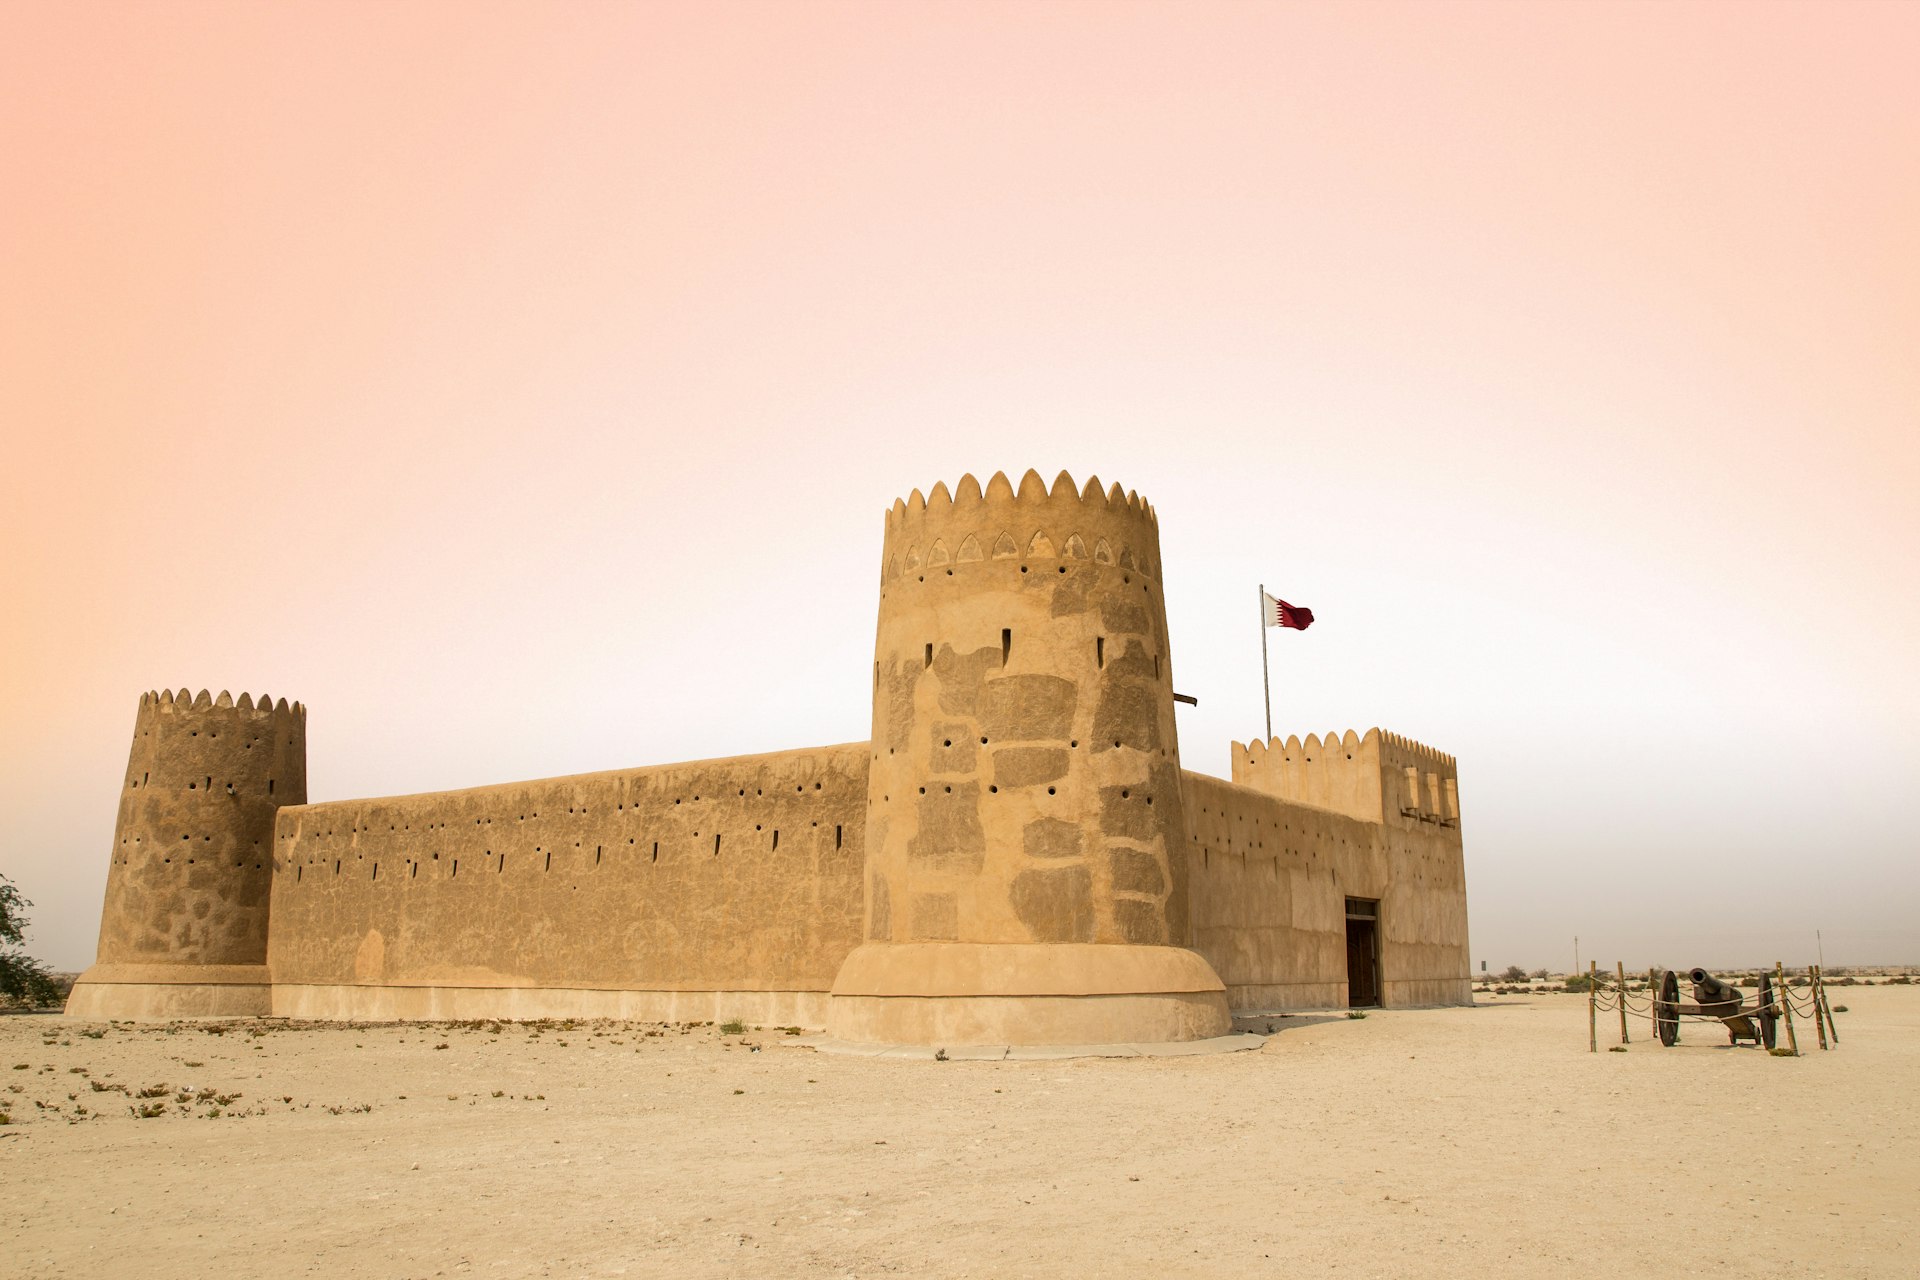 The historic Al Zubarah Fort, a former military fortress, stands in the Qatar desert